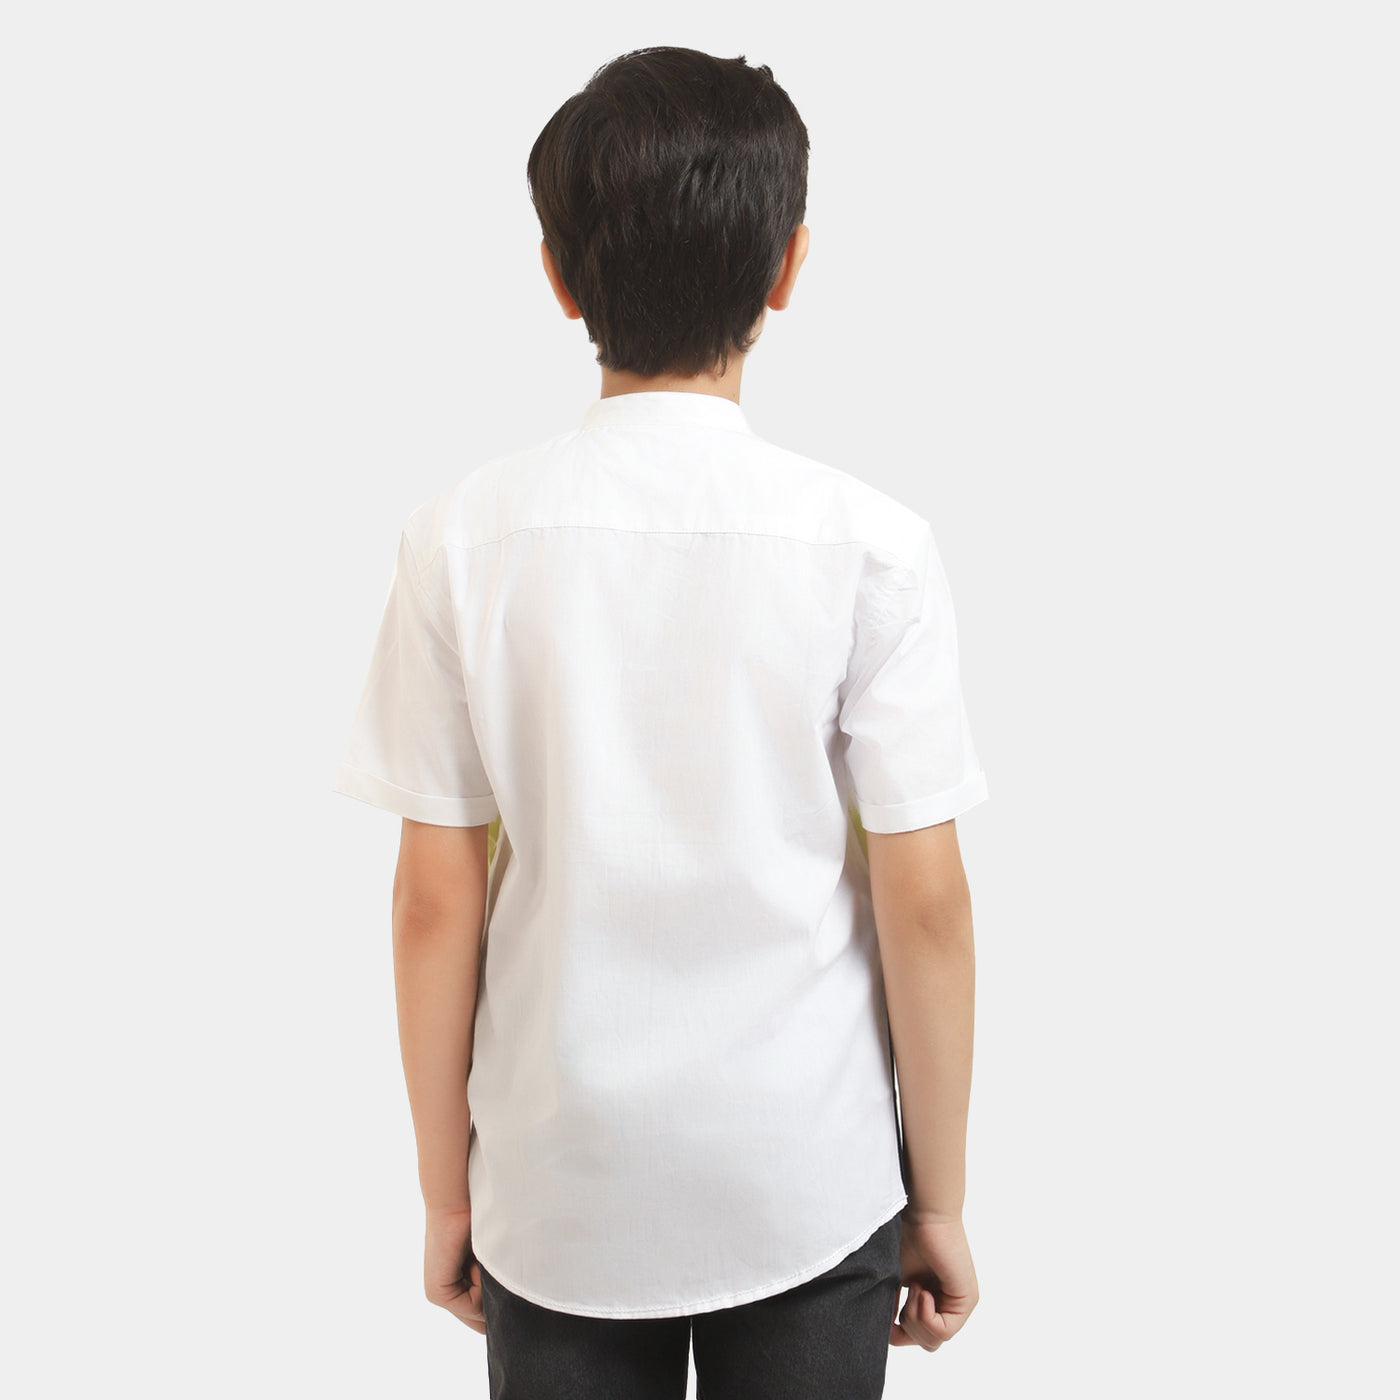 Boys Cotton Casual Shirt Number 1 - White